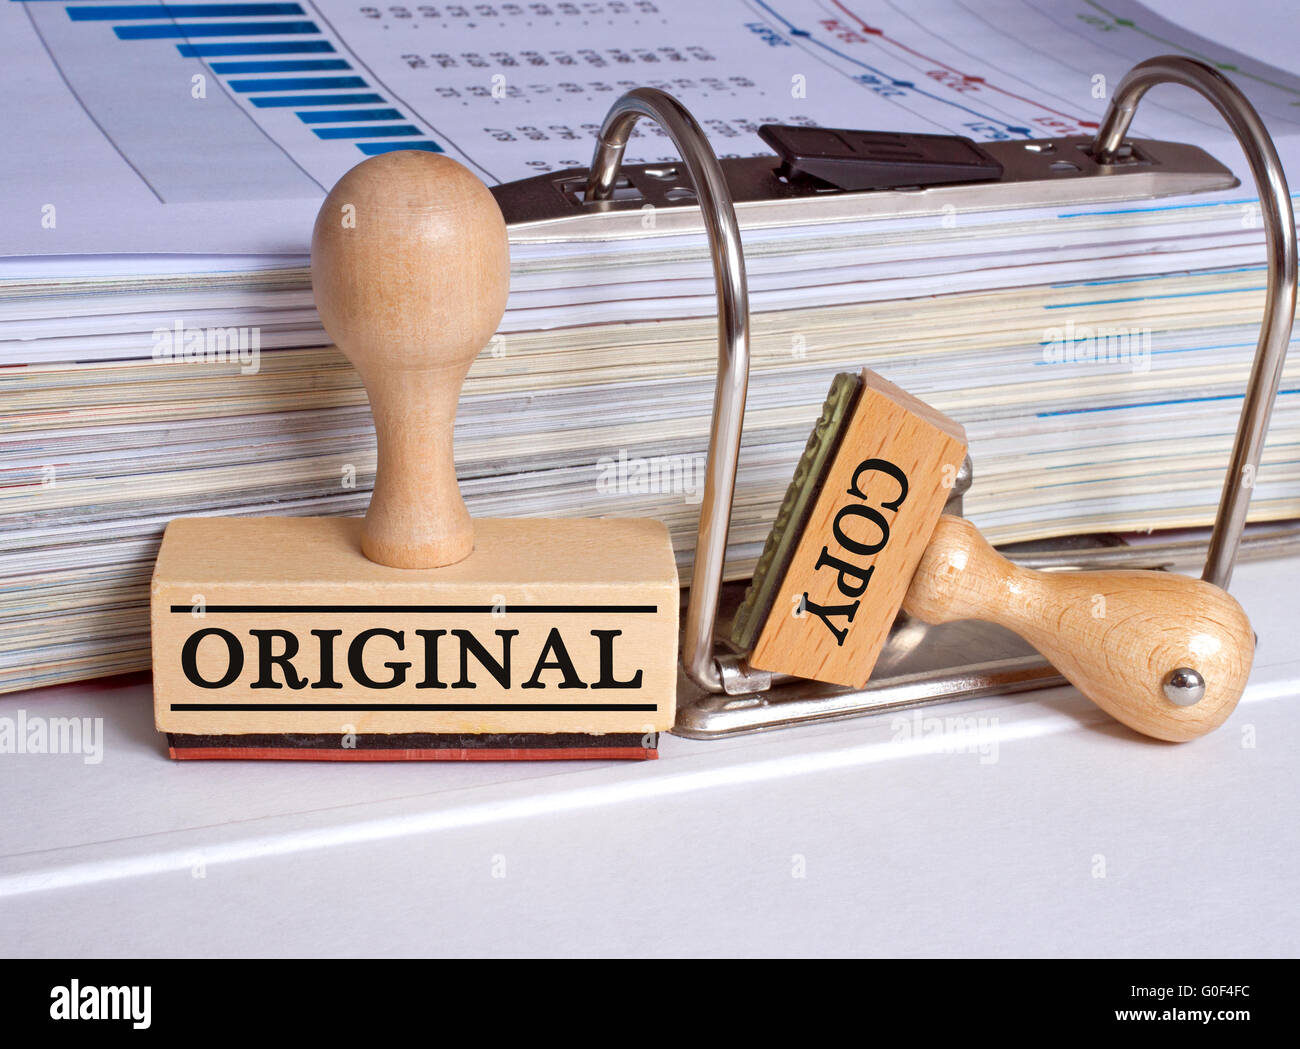 Original and Copy - two stamps in the office Stock Photo